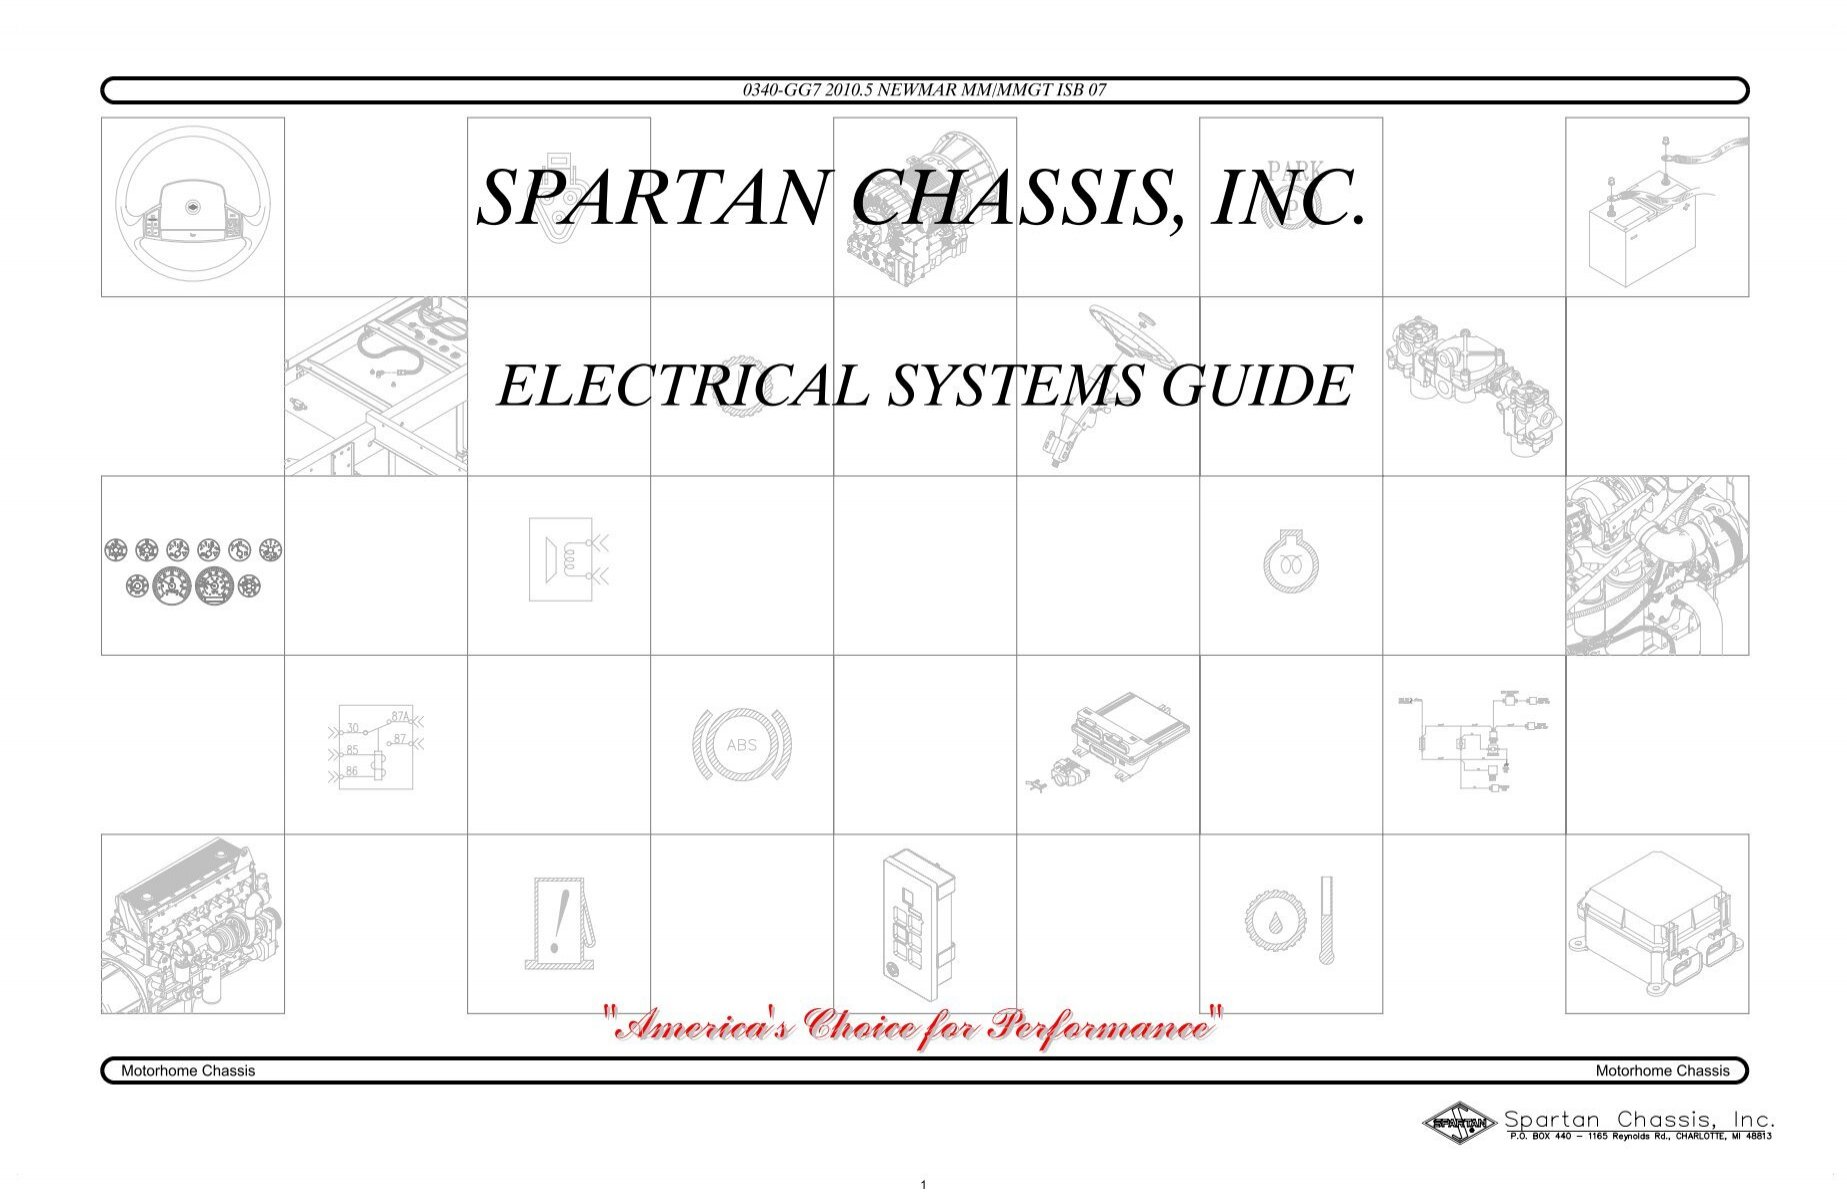 Spartan Motors Chassis, Inc. Circuit Numbers - Spartan Chassis